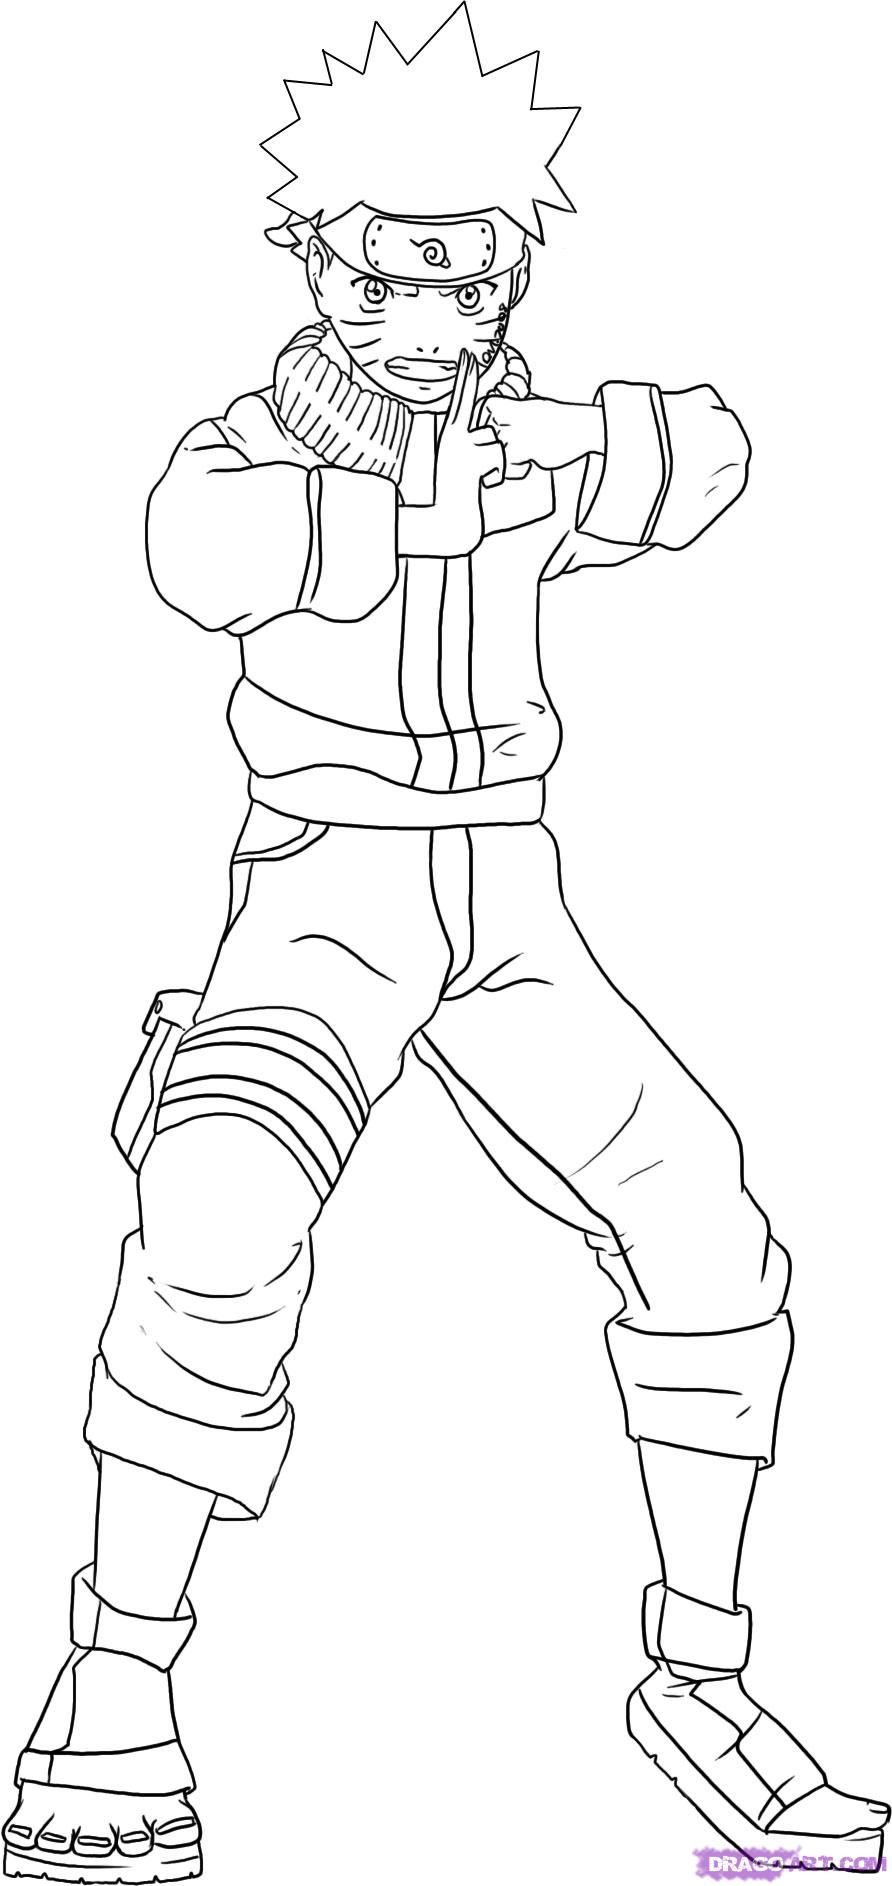 How to draw Naruto - Full Body - Improveyourdrawings.com